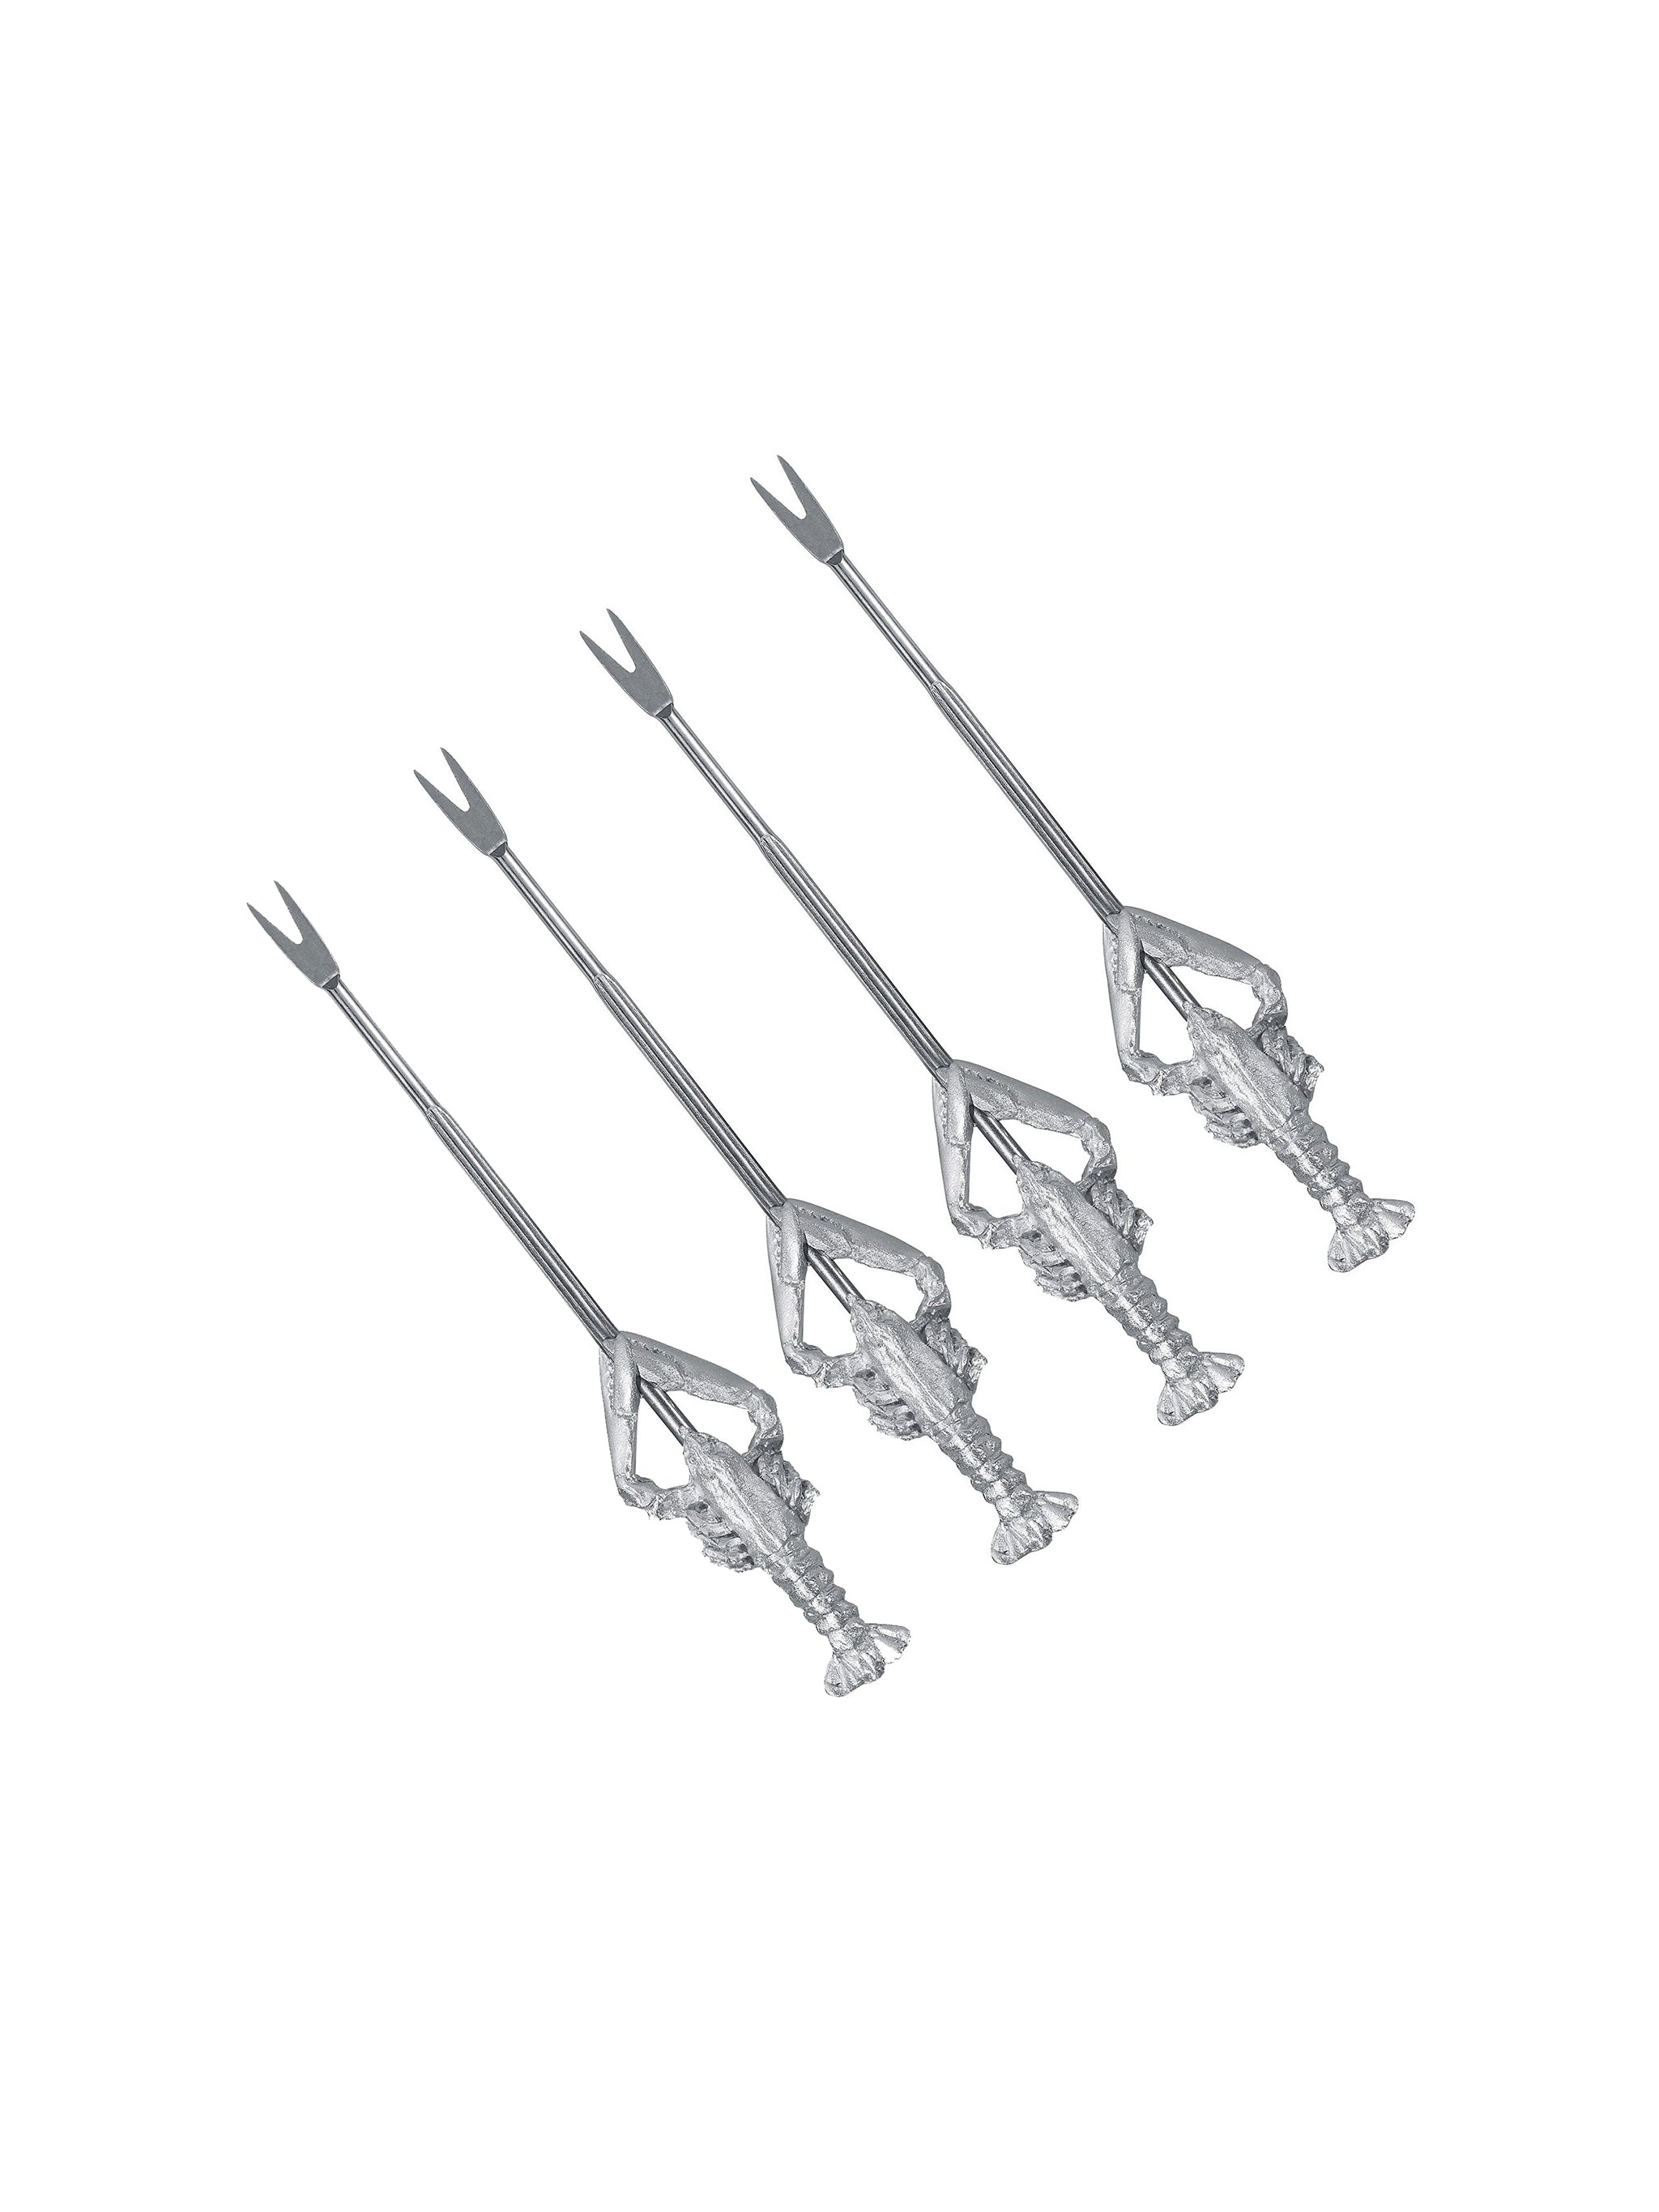 Shop the Pewter Lobster Fork at Weston Table